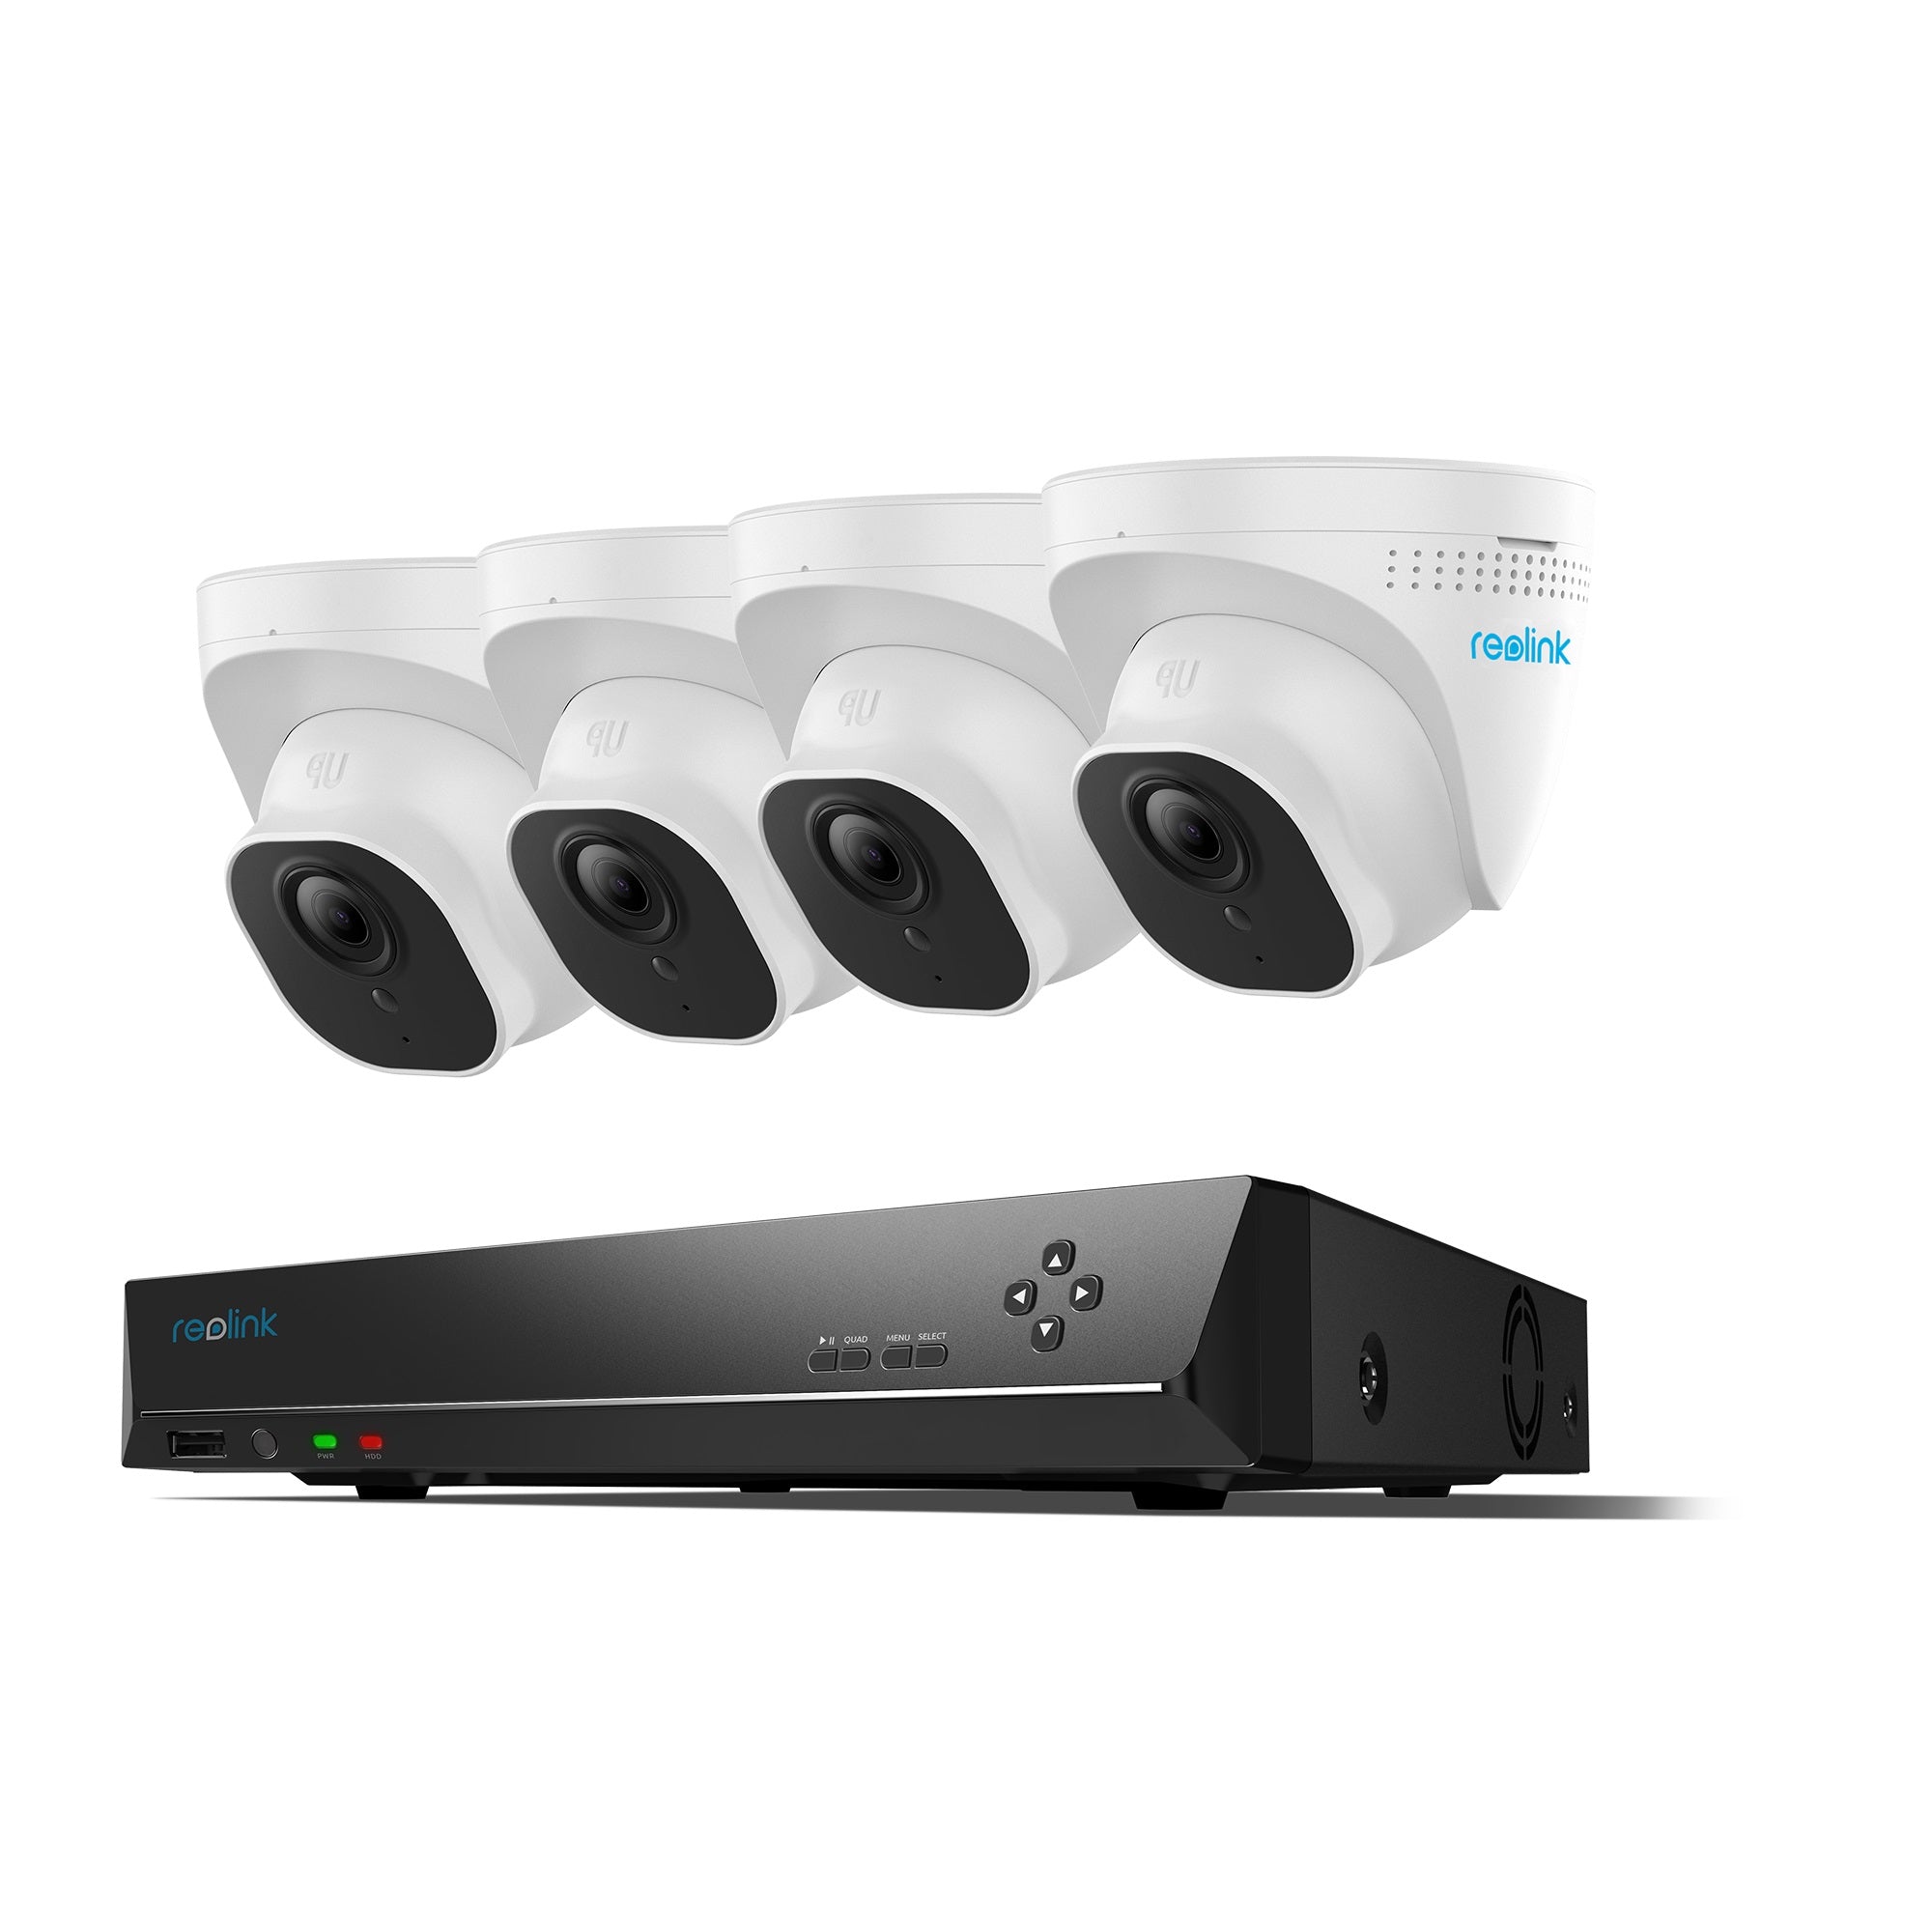 Reolink RLK8-520D4 8-Channel 5MP PoE NVR Security Camera Kit | Person/Vehicle Detection, 2TB HDD Included (Up to 12TB HDD), IP67 Cameras